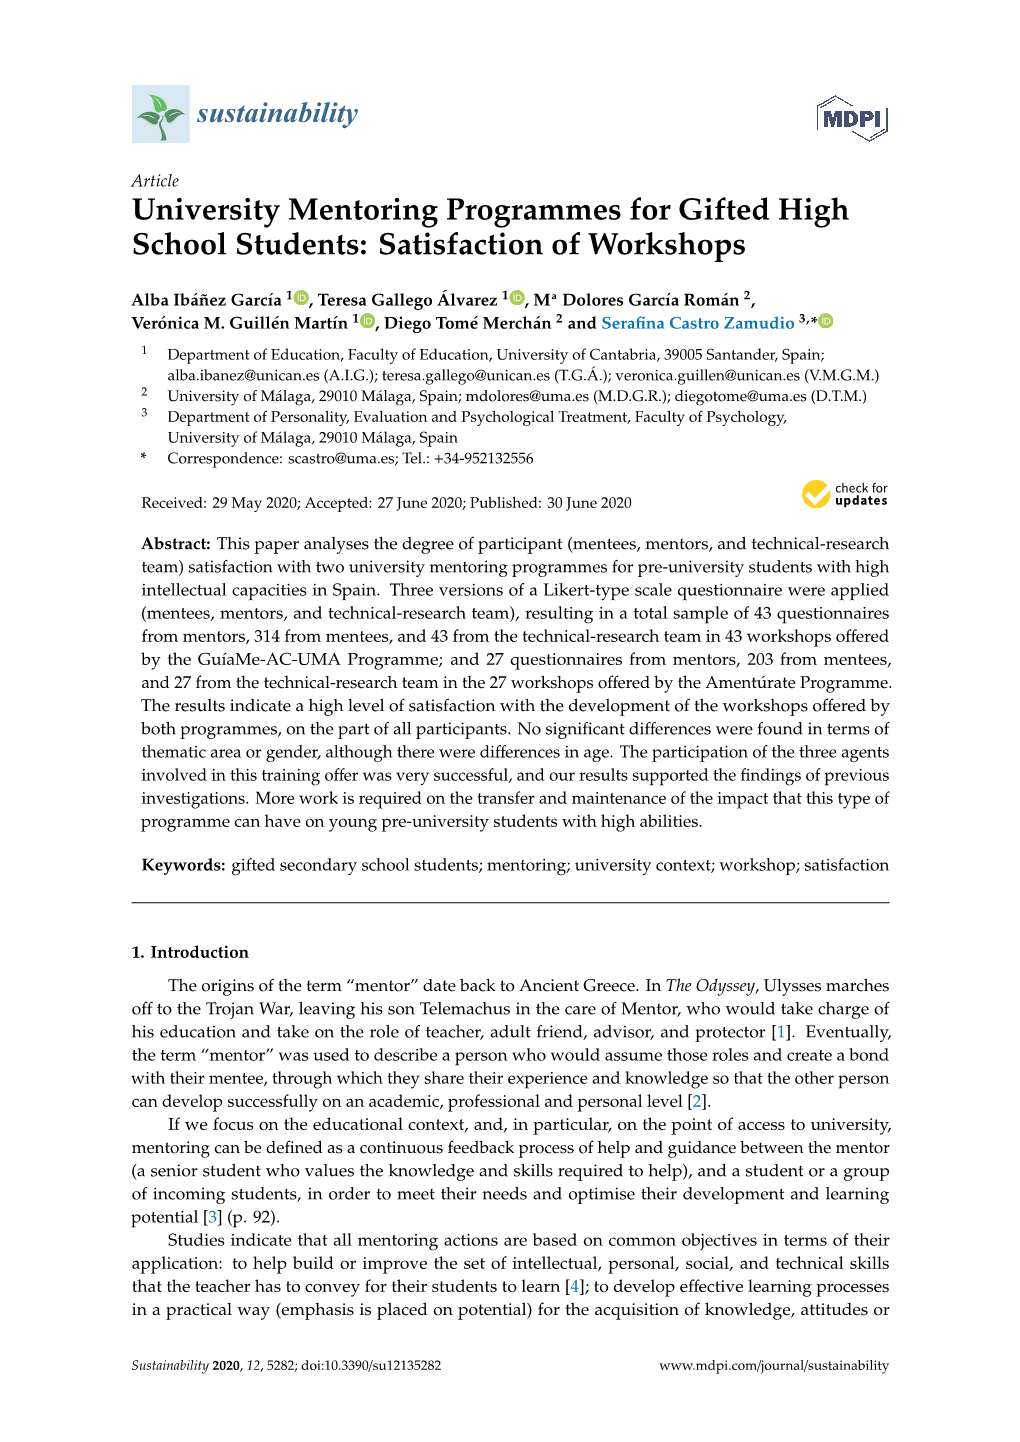 University Mentoring Programmes for Gifted High School Students: Satisfaction of Workshops